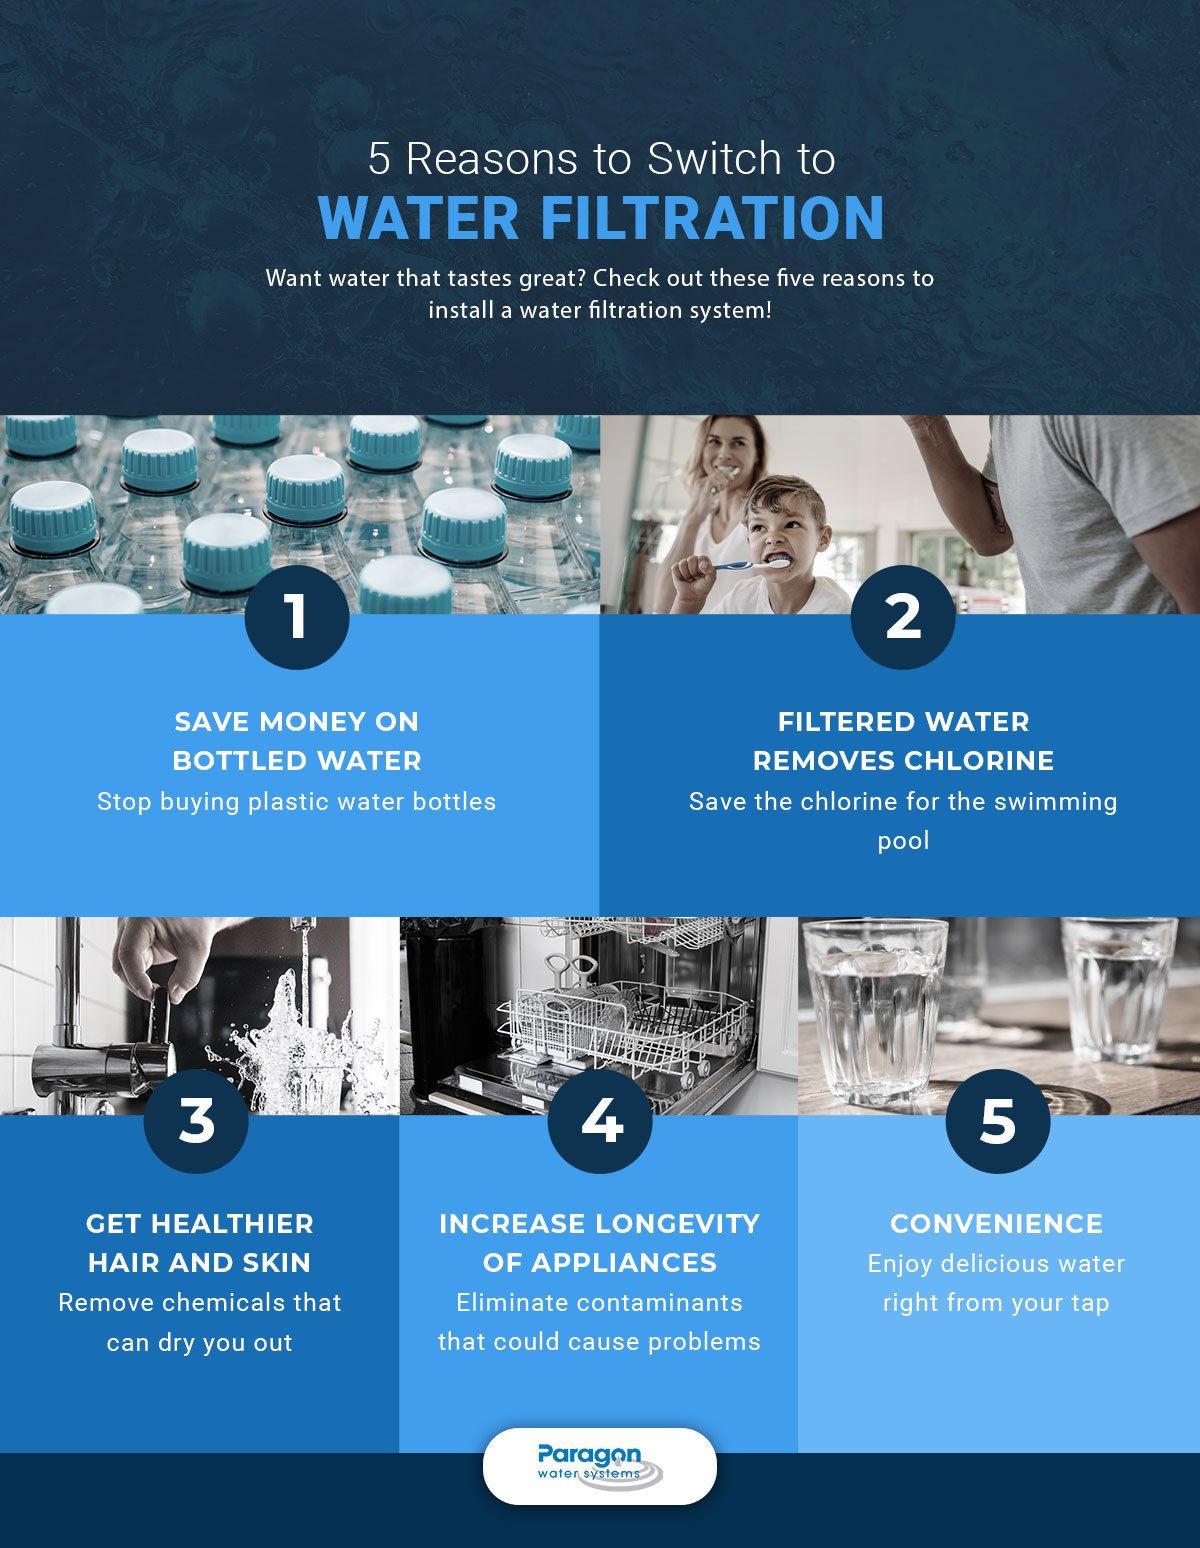 5 Reasons to Switch to Water Filtration - Paragon Water Systems